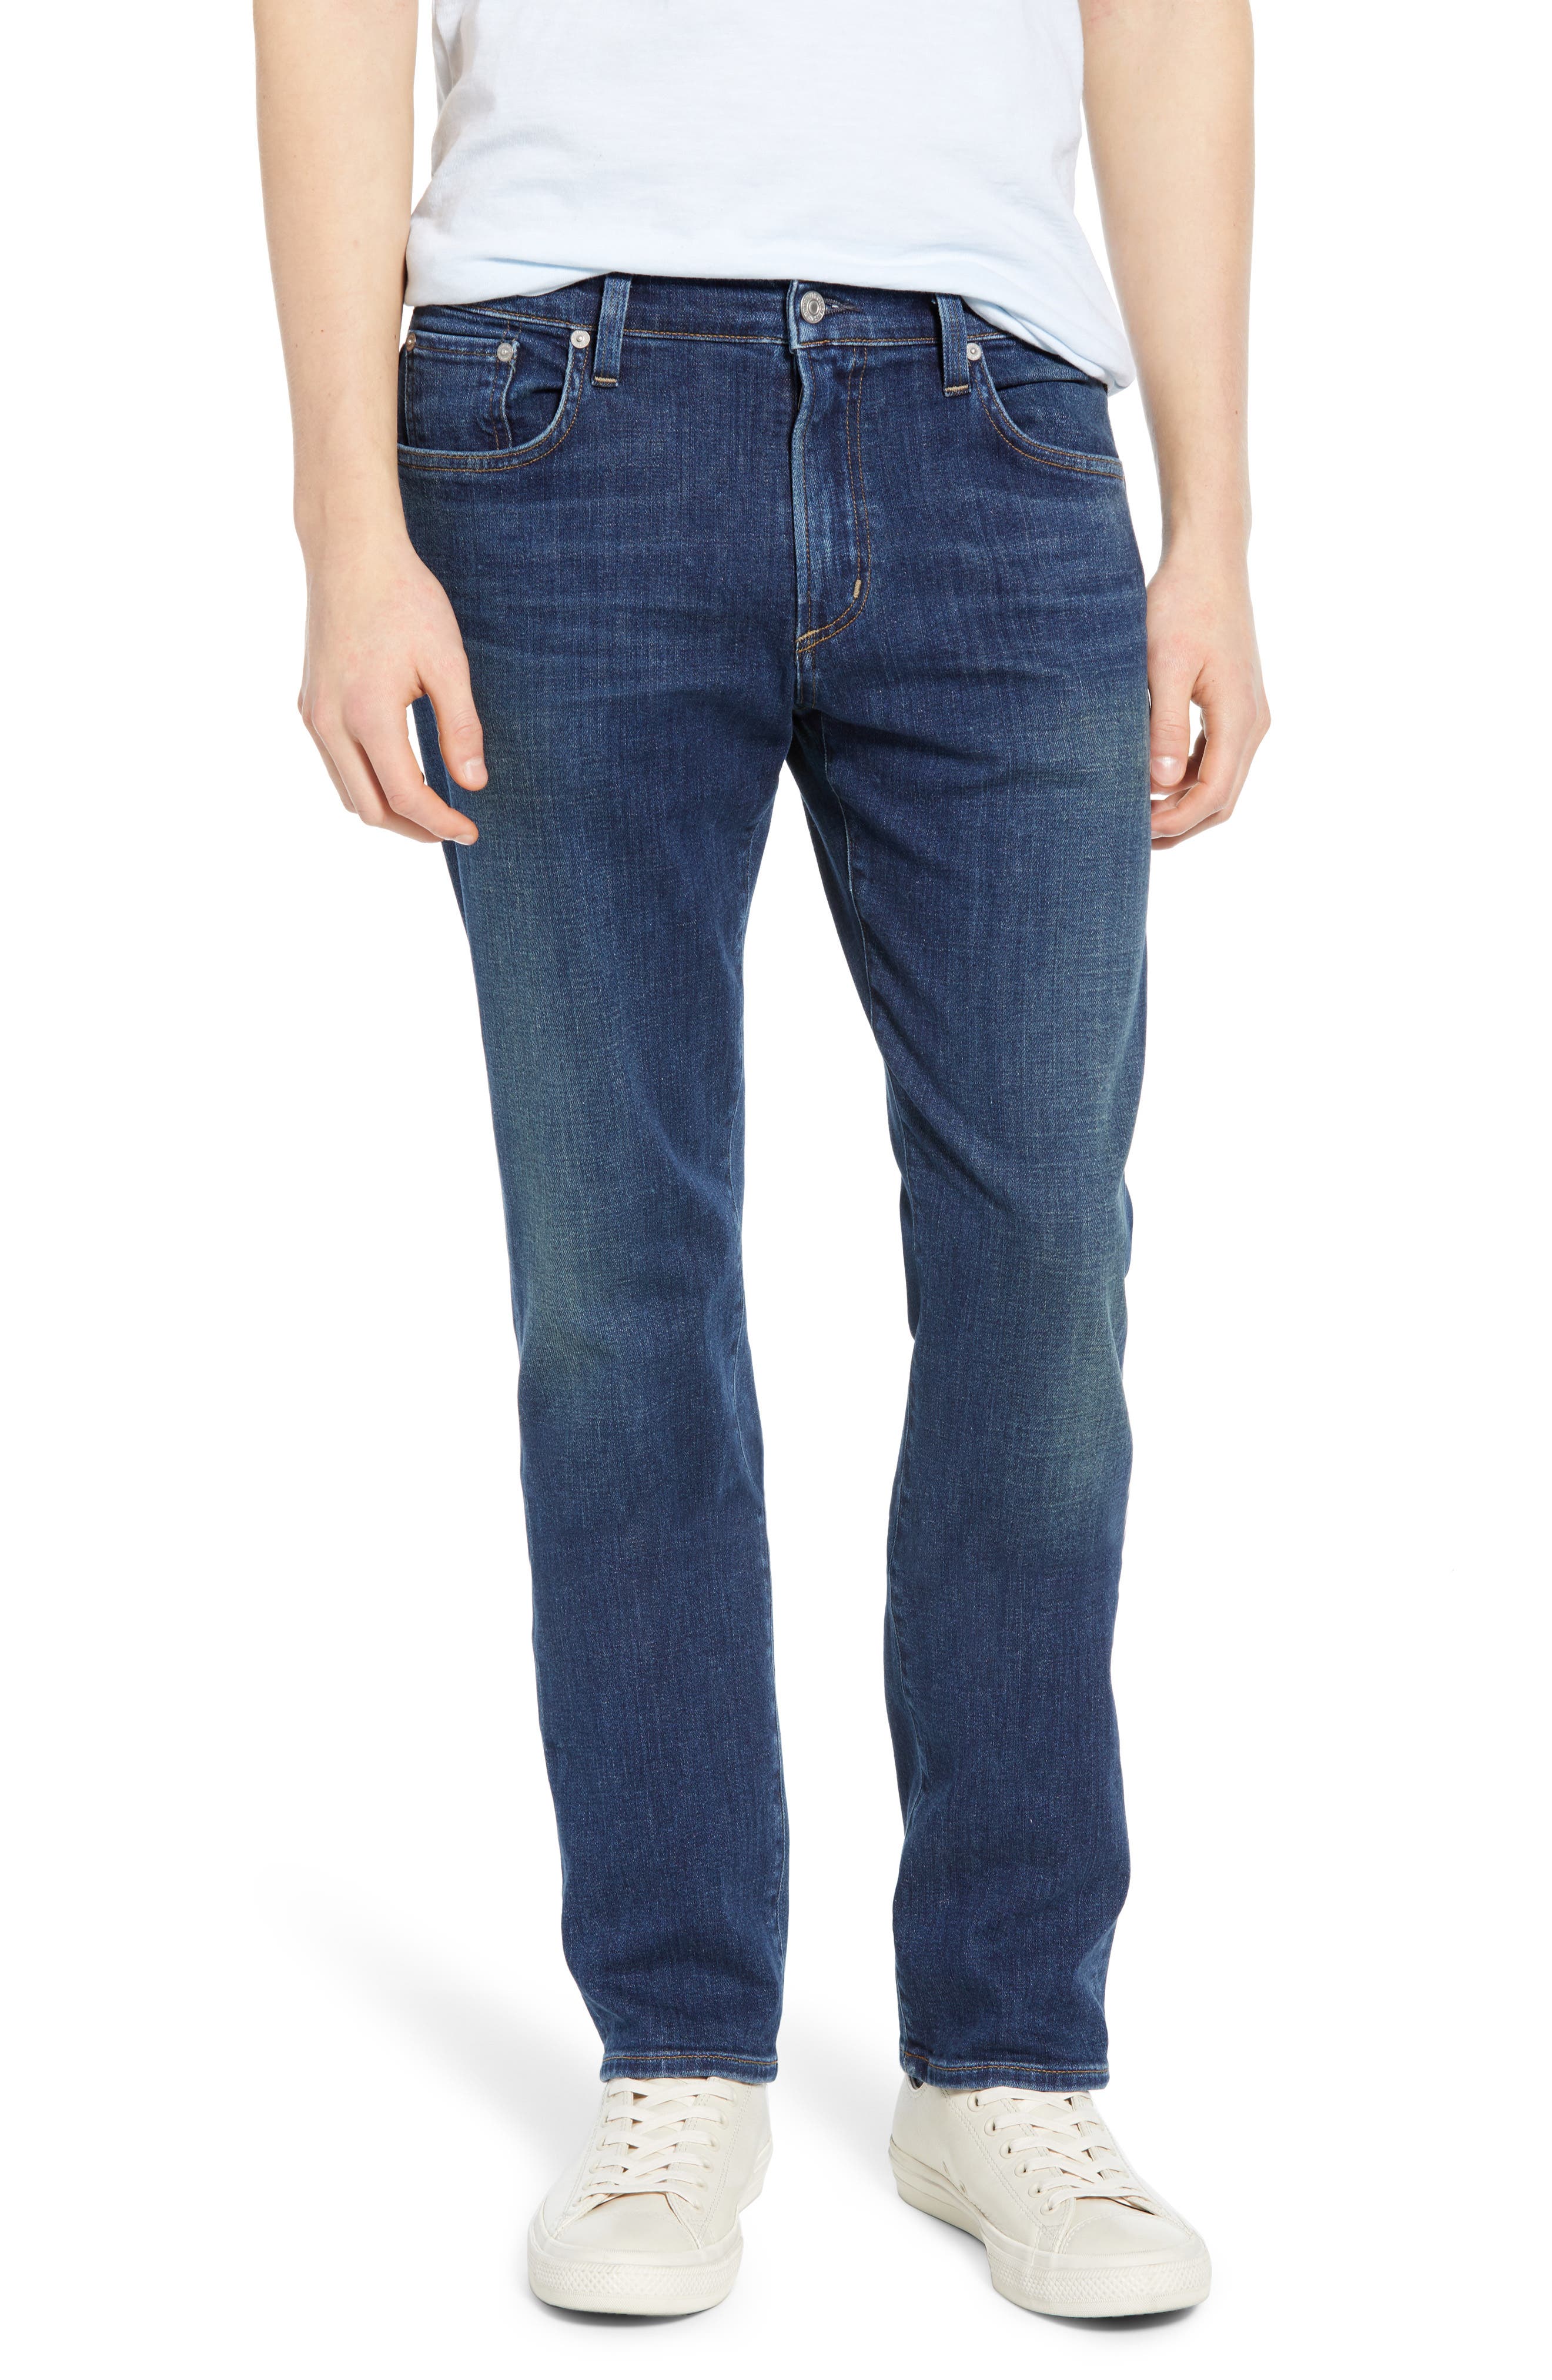 citizens of humanity men's perfect jeans